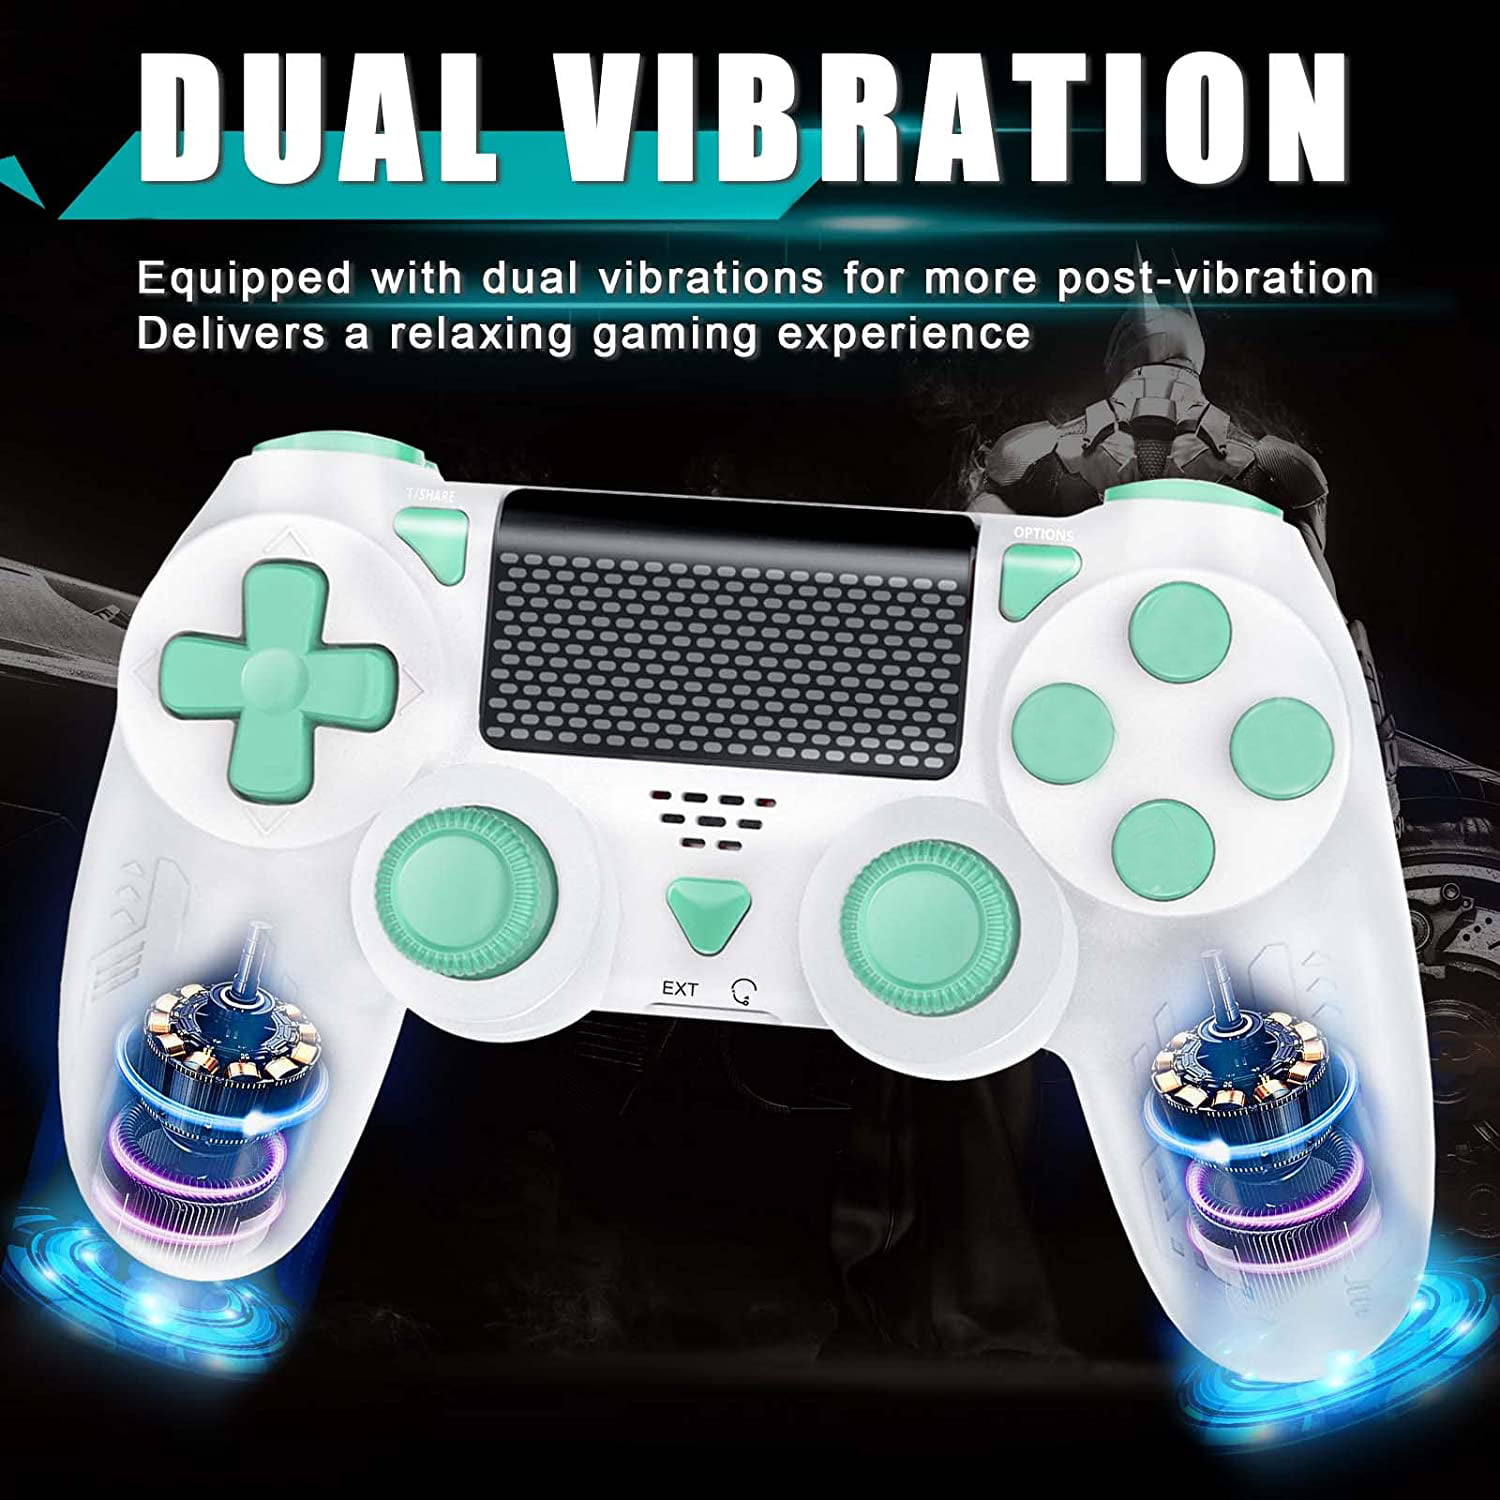 værdighed Lære udenad Dronning 2 Pack Wireless Controller for PS4, Bonadget Wireless Gamepad Compatible  with Playstation 4/ Pro/Slim,PS-4 Remote Built-in 1000mAh Battery with  Turbo/ Dual Vibration/6-Axis Motion Sensor - Walmart.com